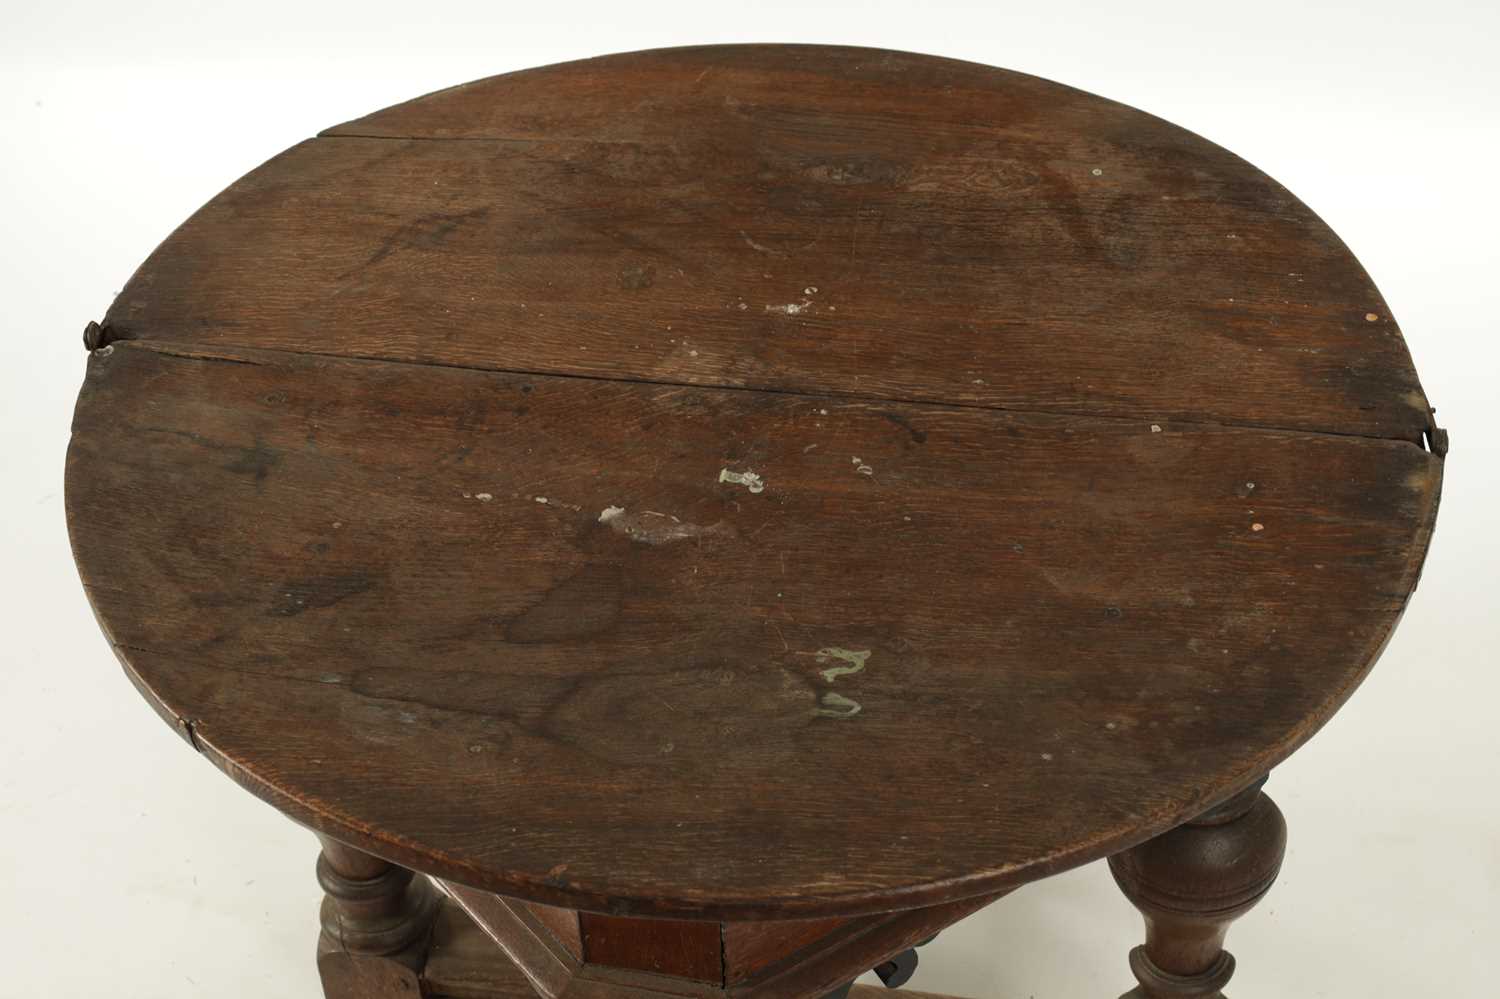 A LATE 17TH CENTURY OAK CREDENCE TABLE - Image 3 of 3